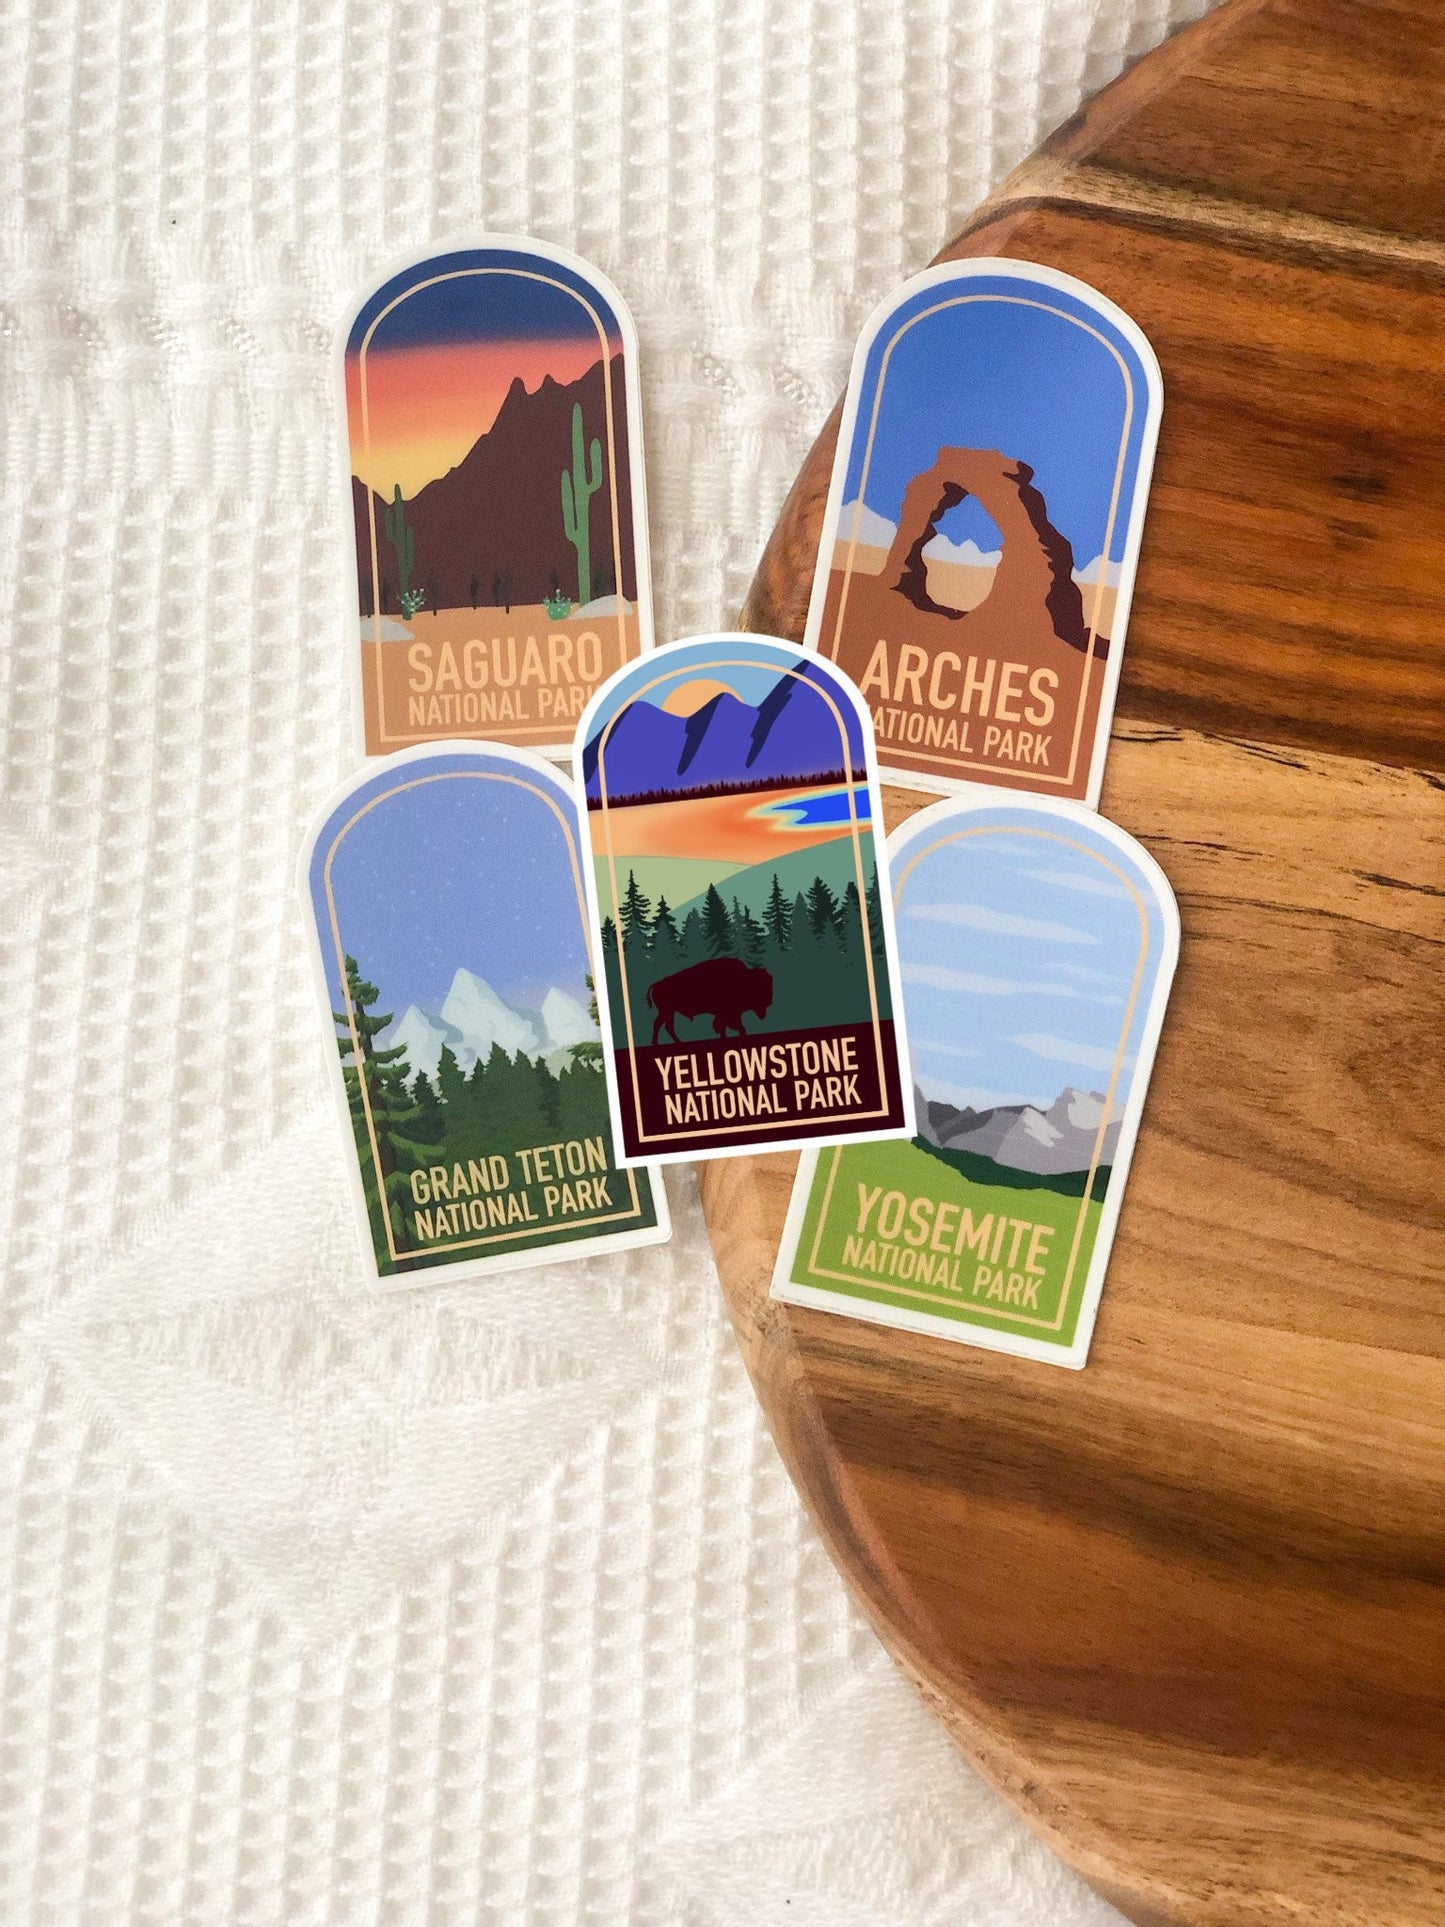 Yosemite National Park stickers, National Parks stickers, 3x3in. Vinyl stickers perfect for Water Bottles, Bullet Journals, Laptops, etc.